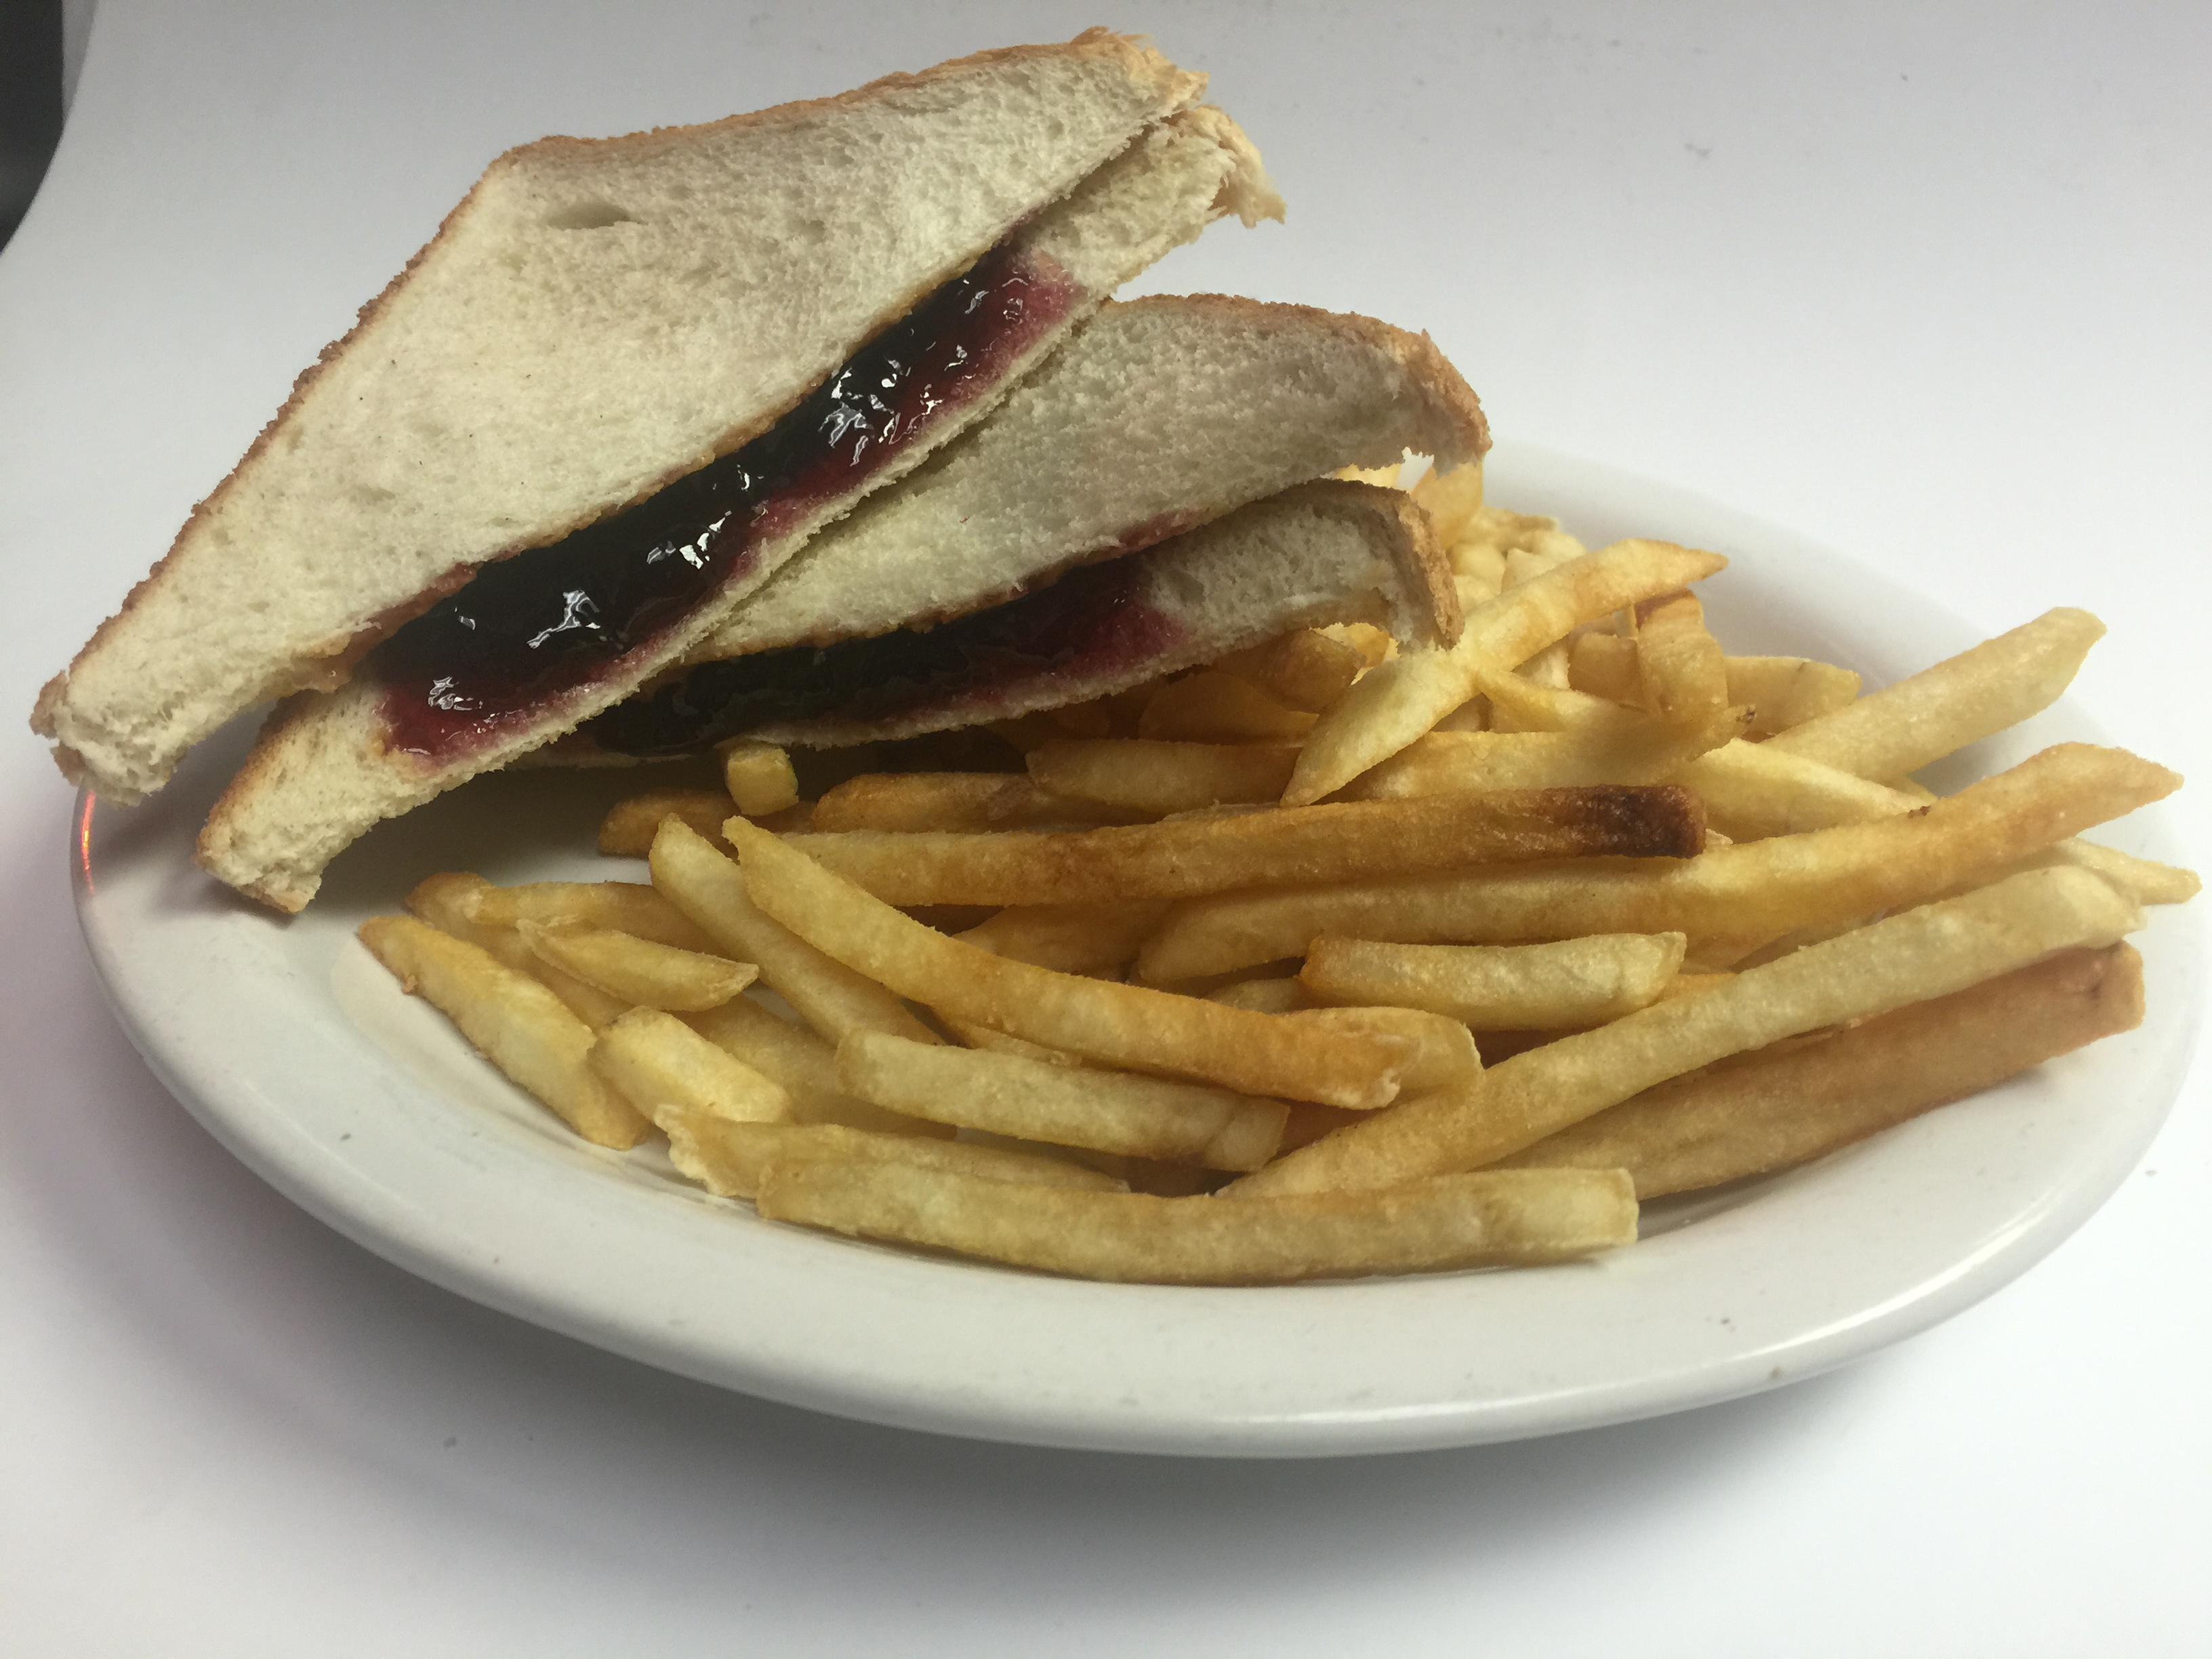 Ninos | Blue Apache Mexican Restaurant Peanut Butter And Jelly Sandwich In Spanish